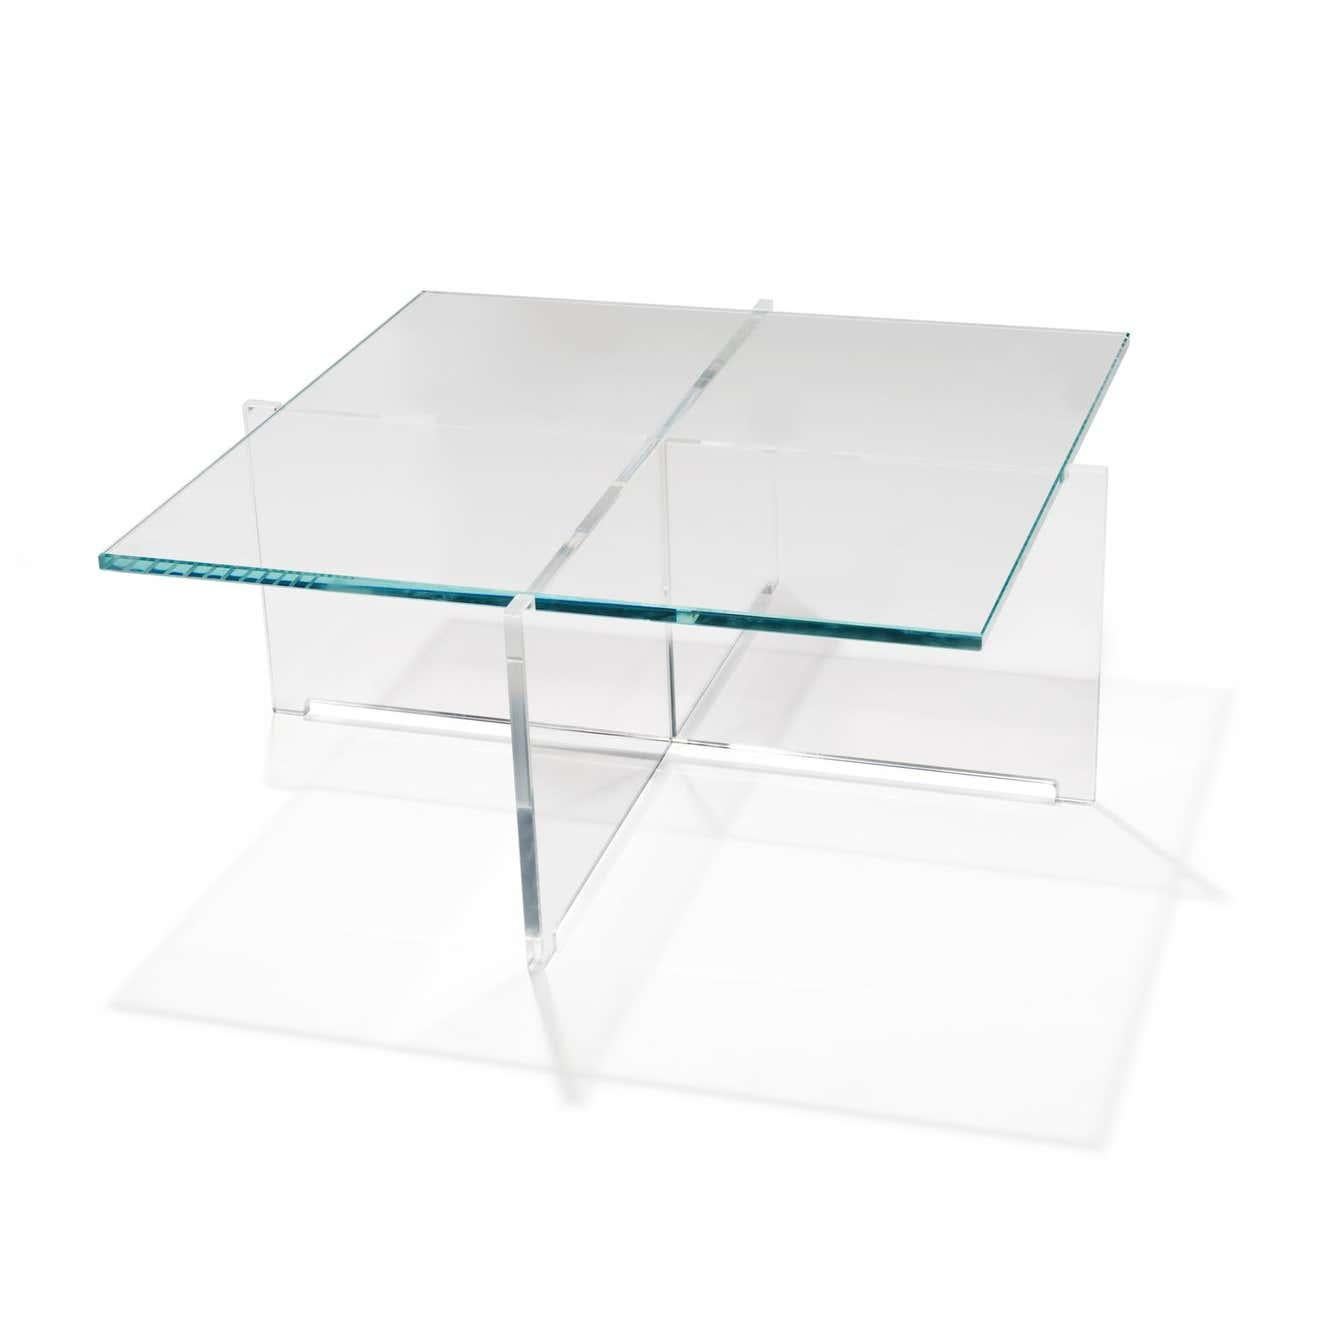 Bodil Kjær 'Crossplex Low Table', Polycarbonate and Glass by Karakter In New Condition For Sale In Barcelona, Barcelona